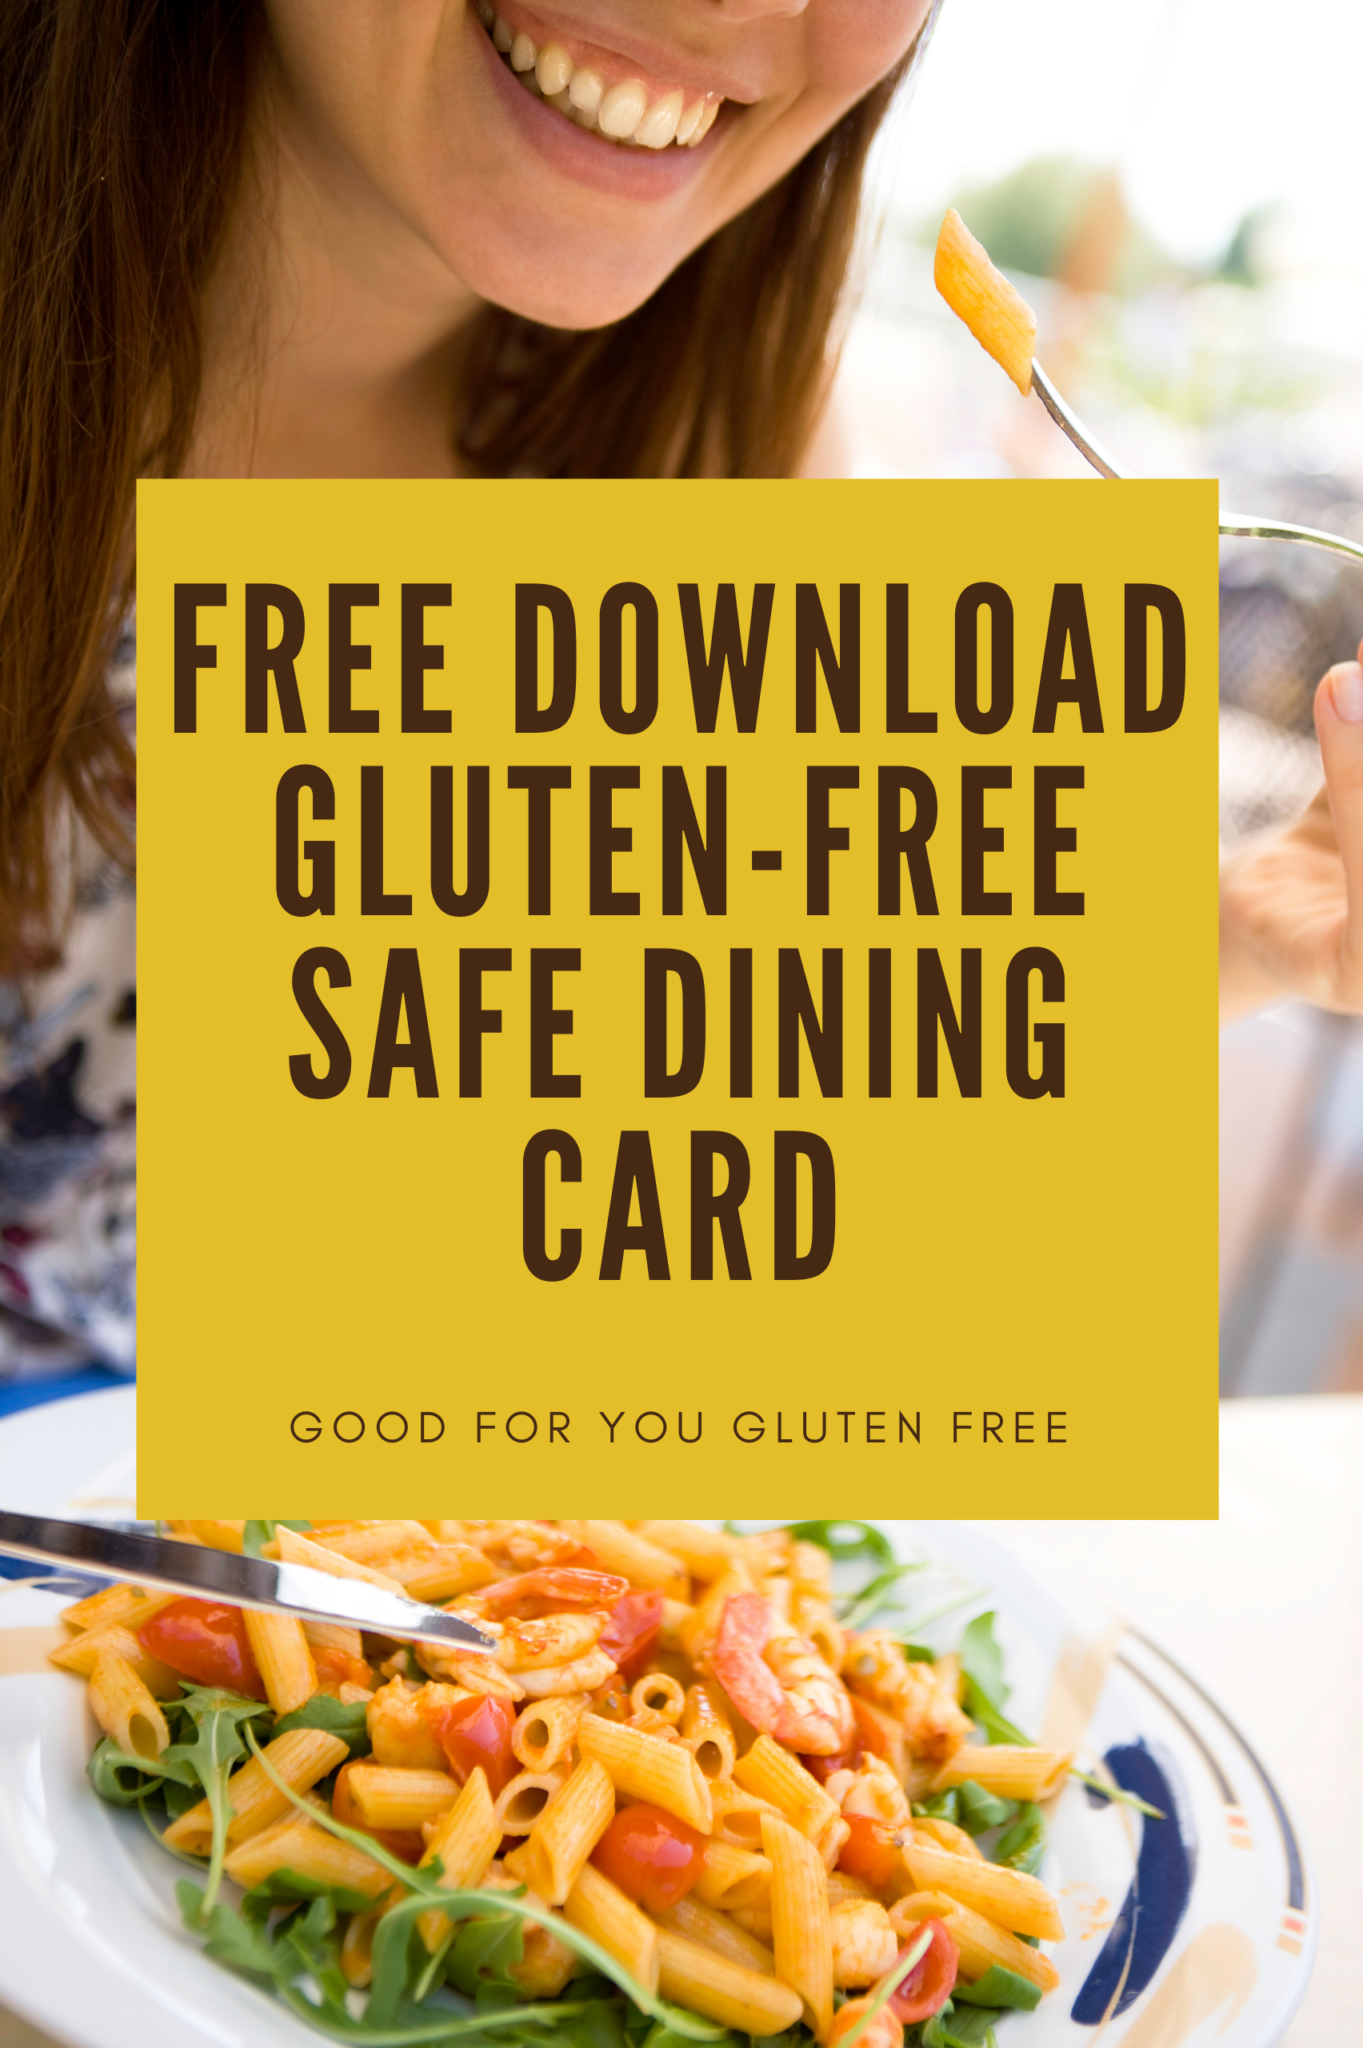 Free download - gluten-free safe dining card